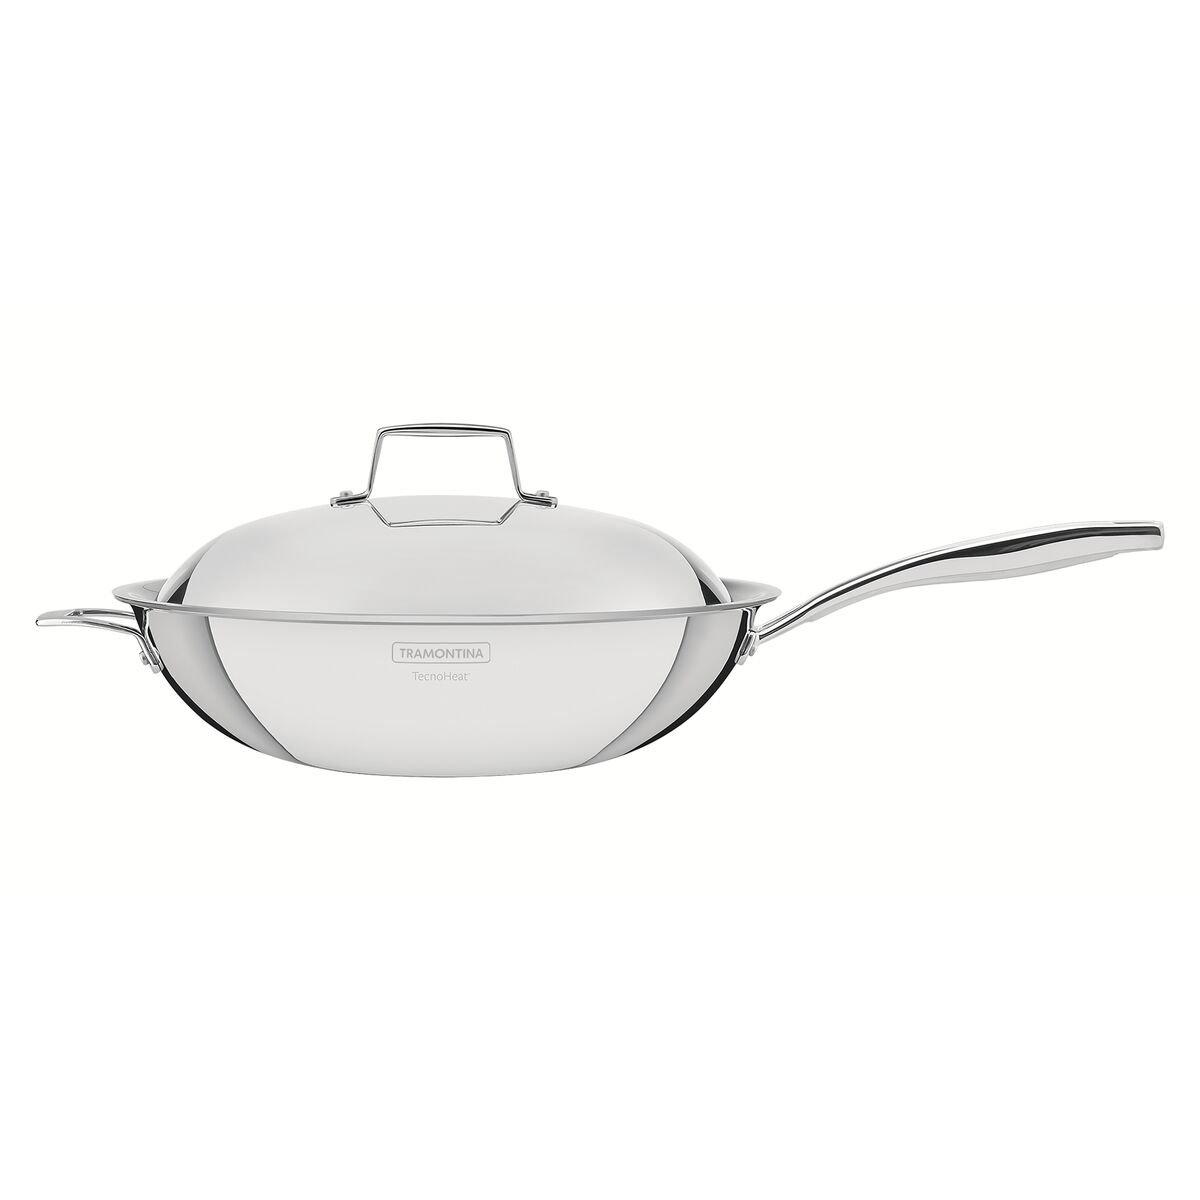 Tramontina Grano 32 cm 5.2 L stainless steel wok with tri-ply body, lid and long handle